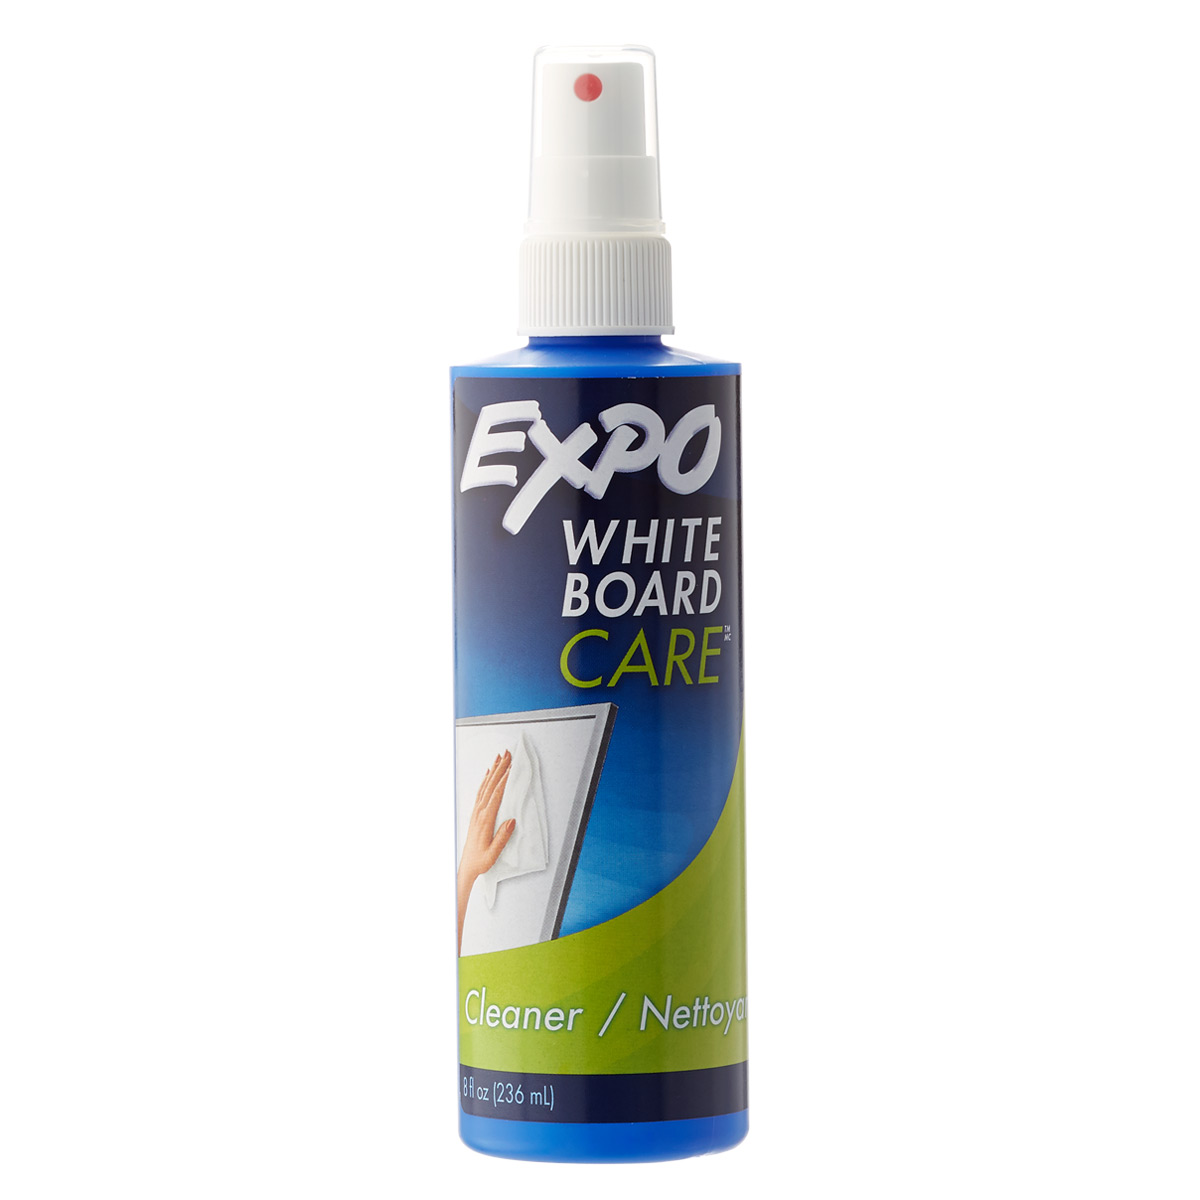 Expo, Office, 4 Expo White Board Cleaner